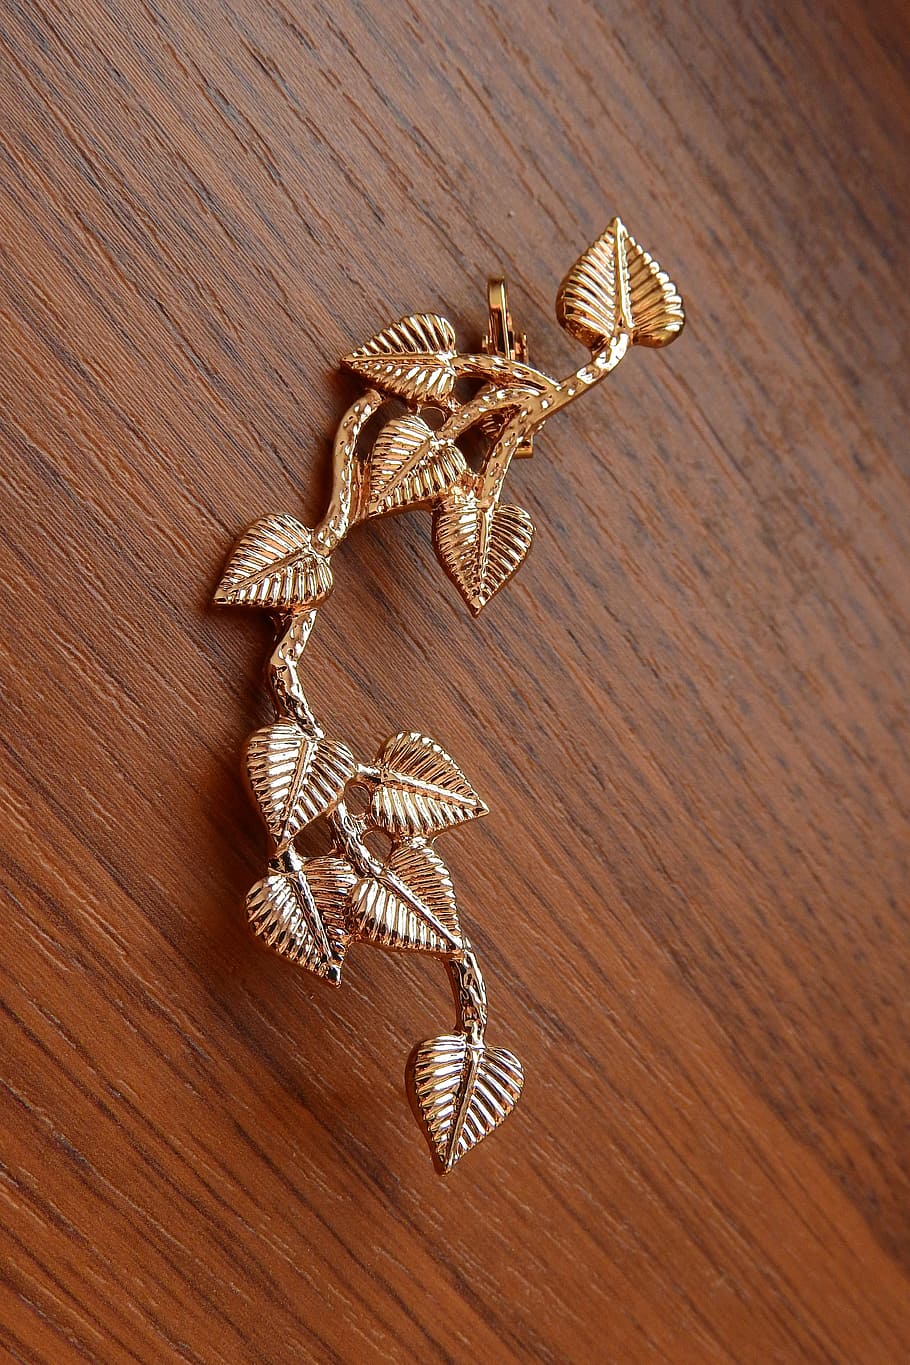 golden earring, big earrings, gold jewelry, earrings with petals, gold twig with leaves, wood - material, indoors, decoration, art and craft, table